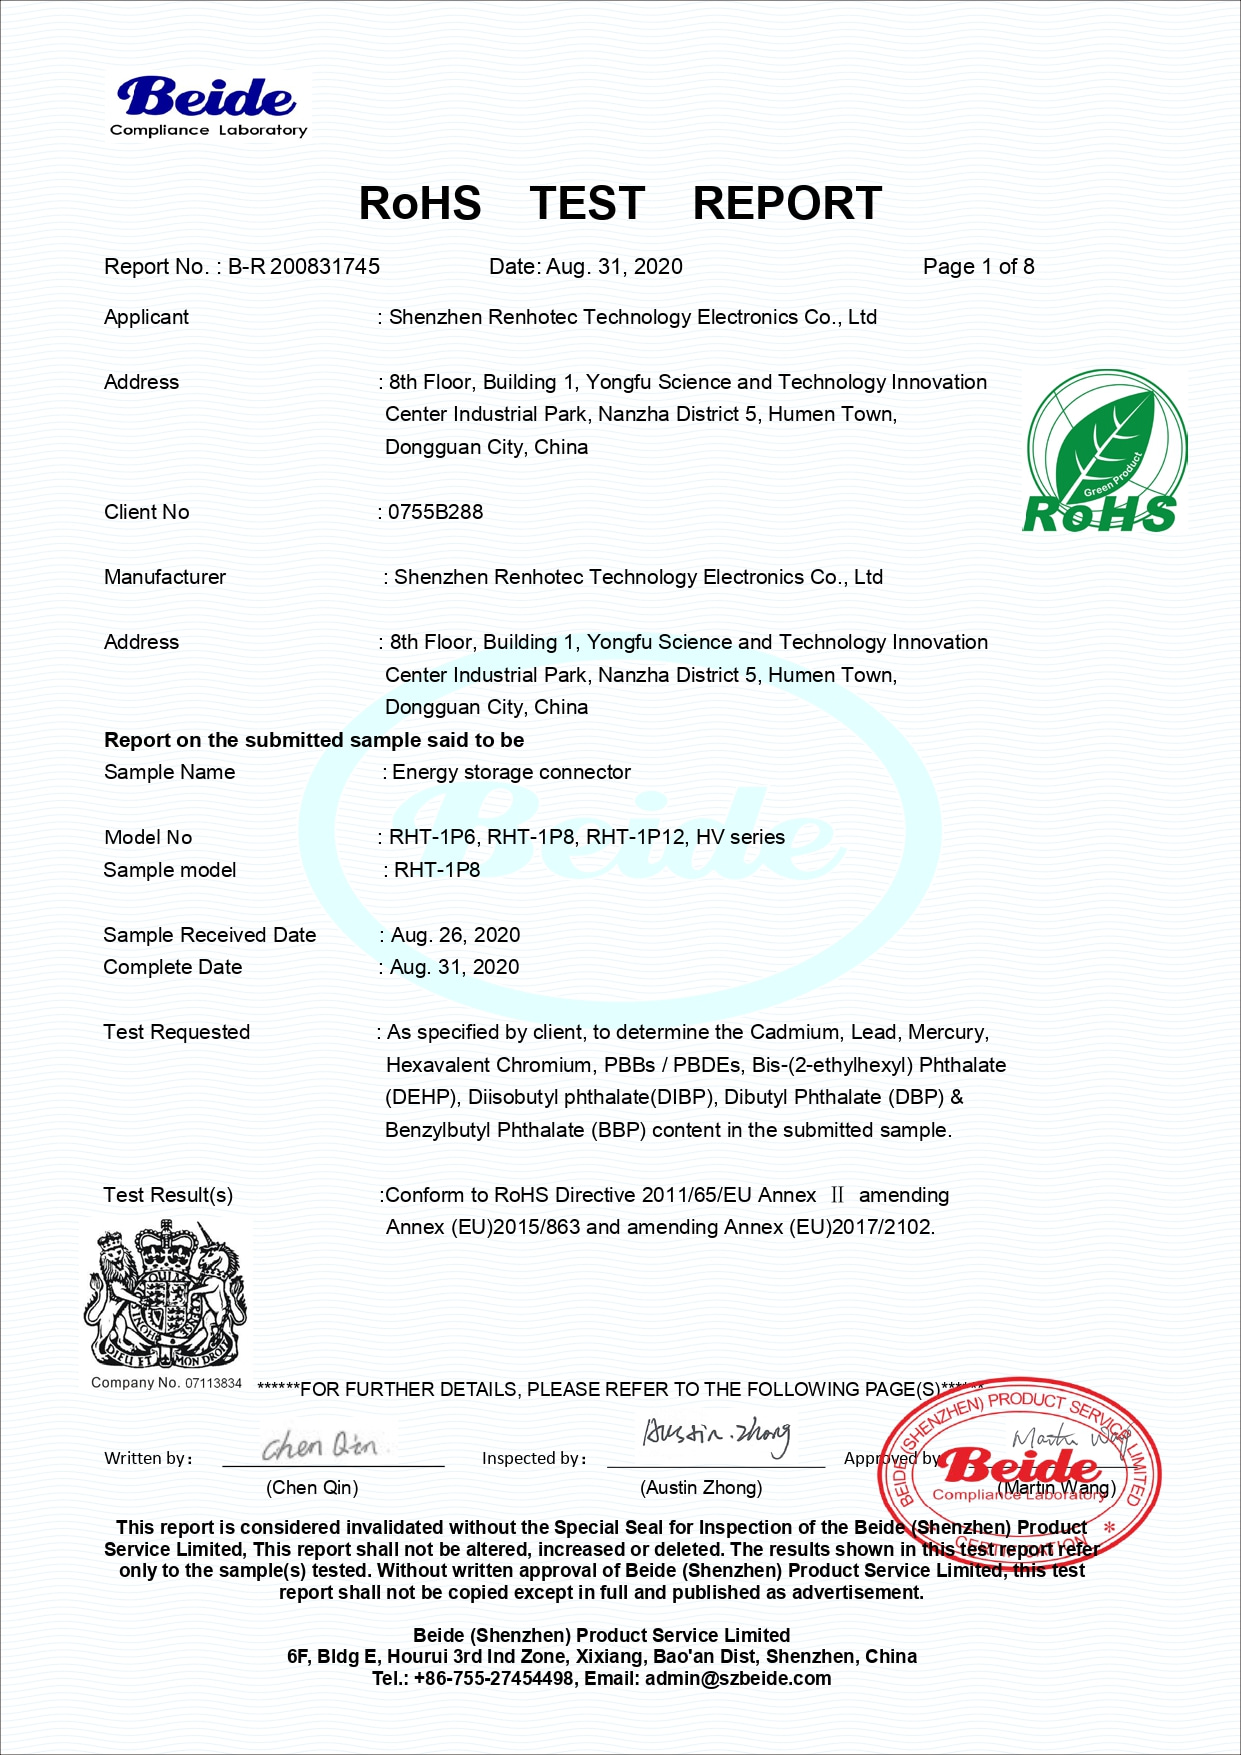 31745-ROHS Test Report - Energy storage connector